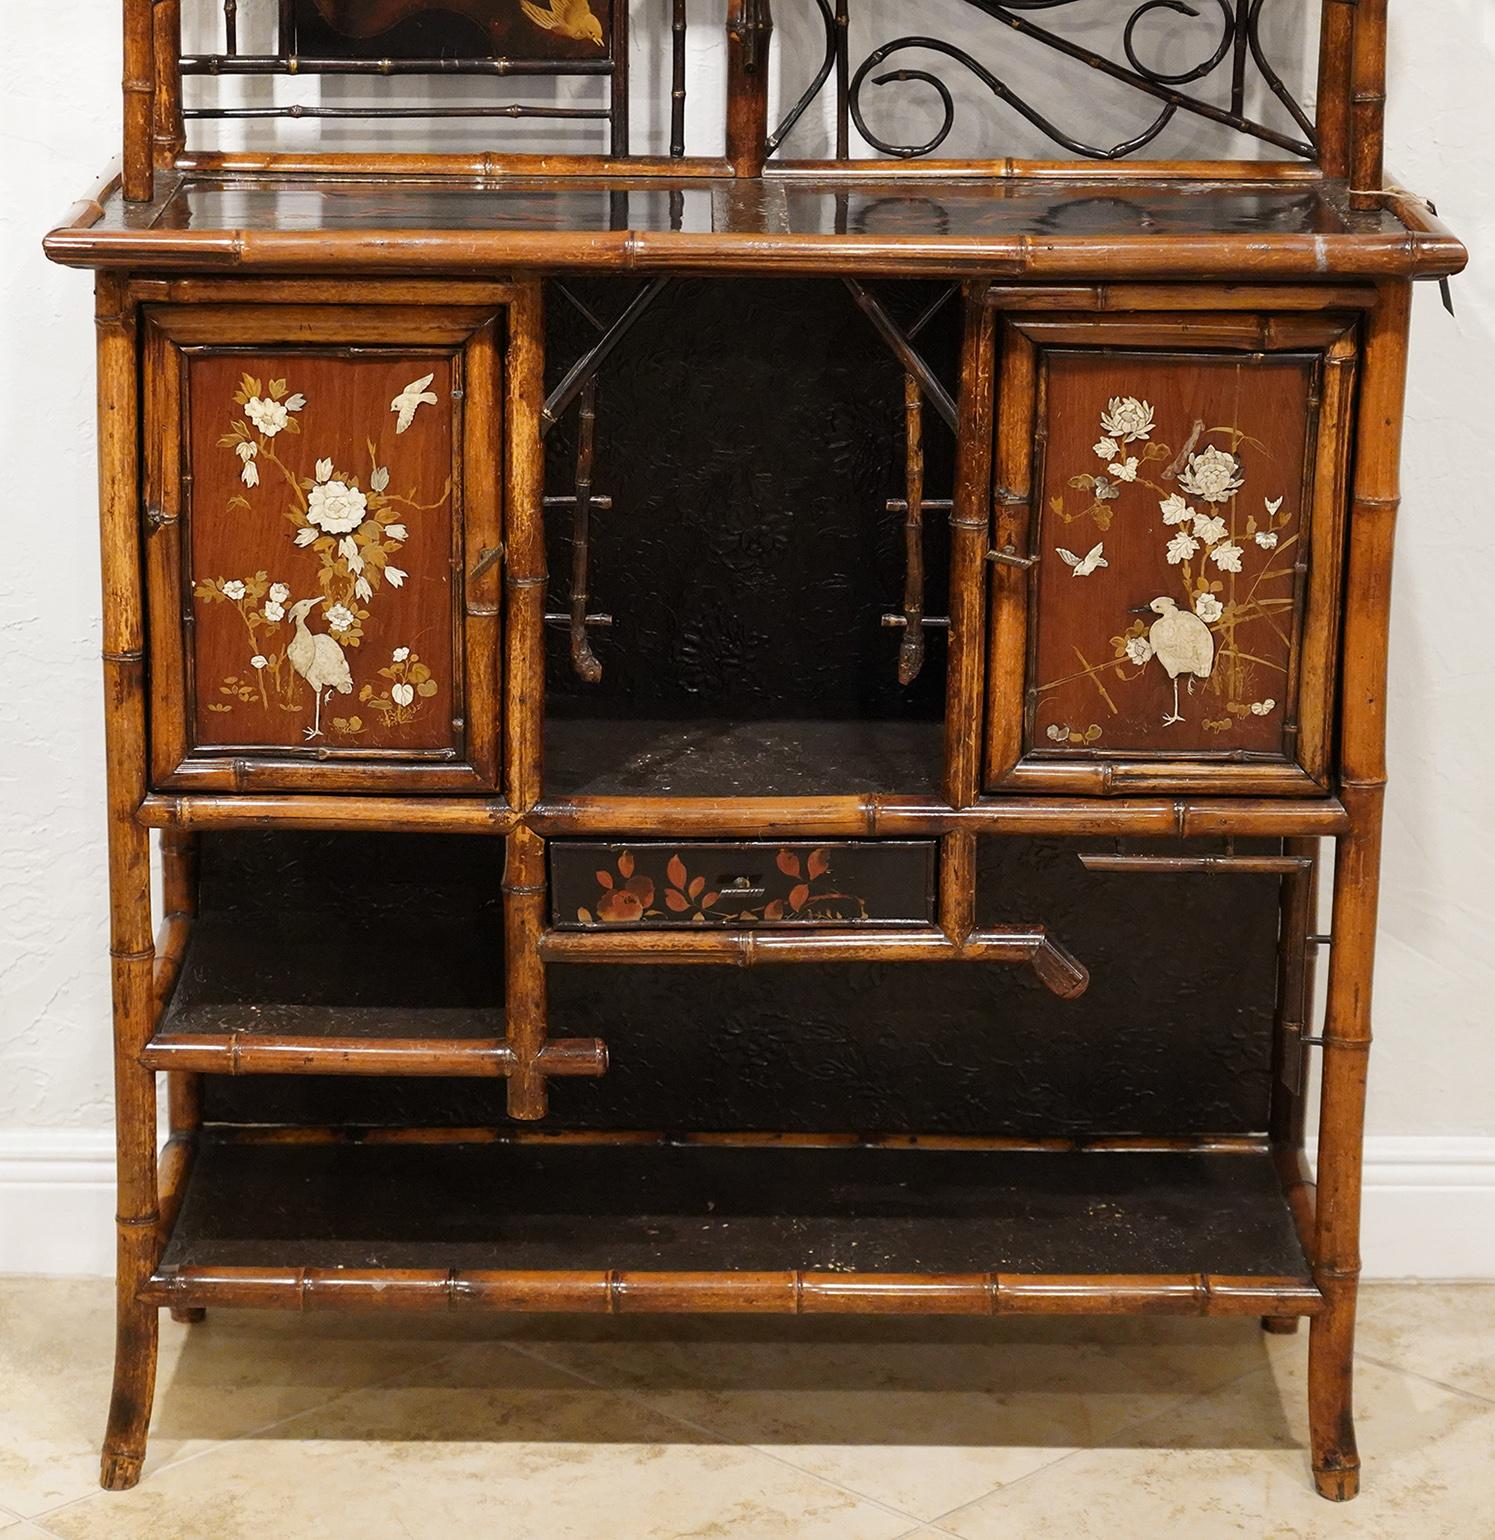 19th Century English Aesthetic Movement Bamboo and Lacquer Inlaid Cabinet Etagere, circa 1890